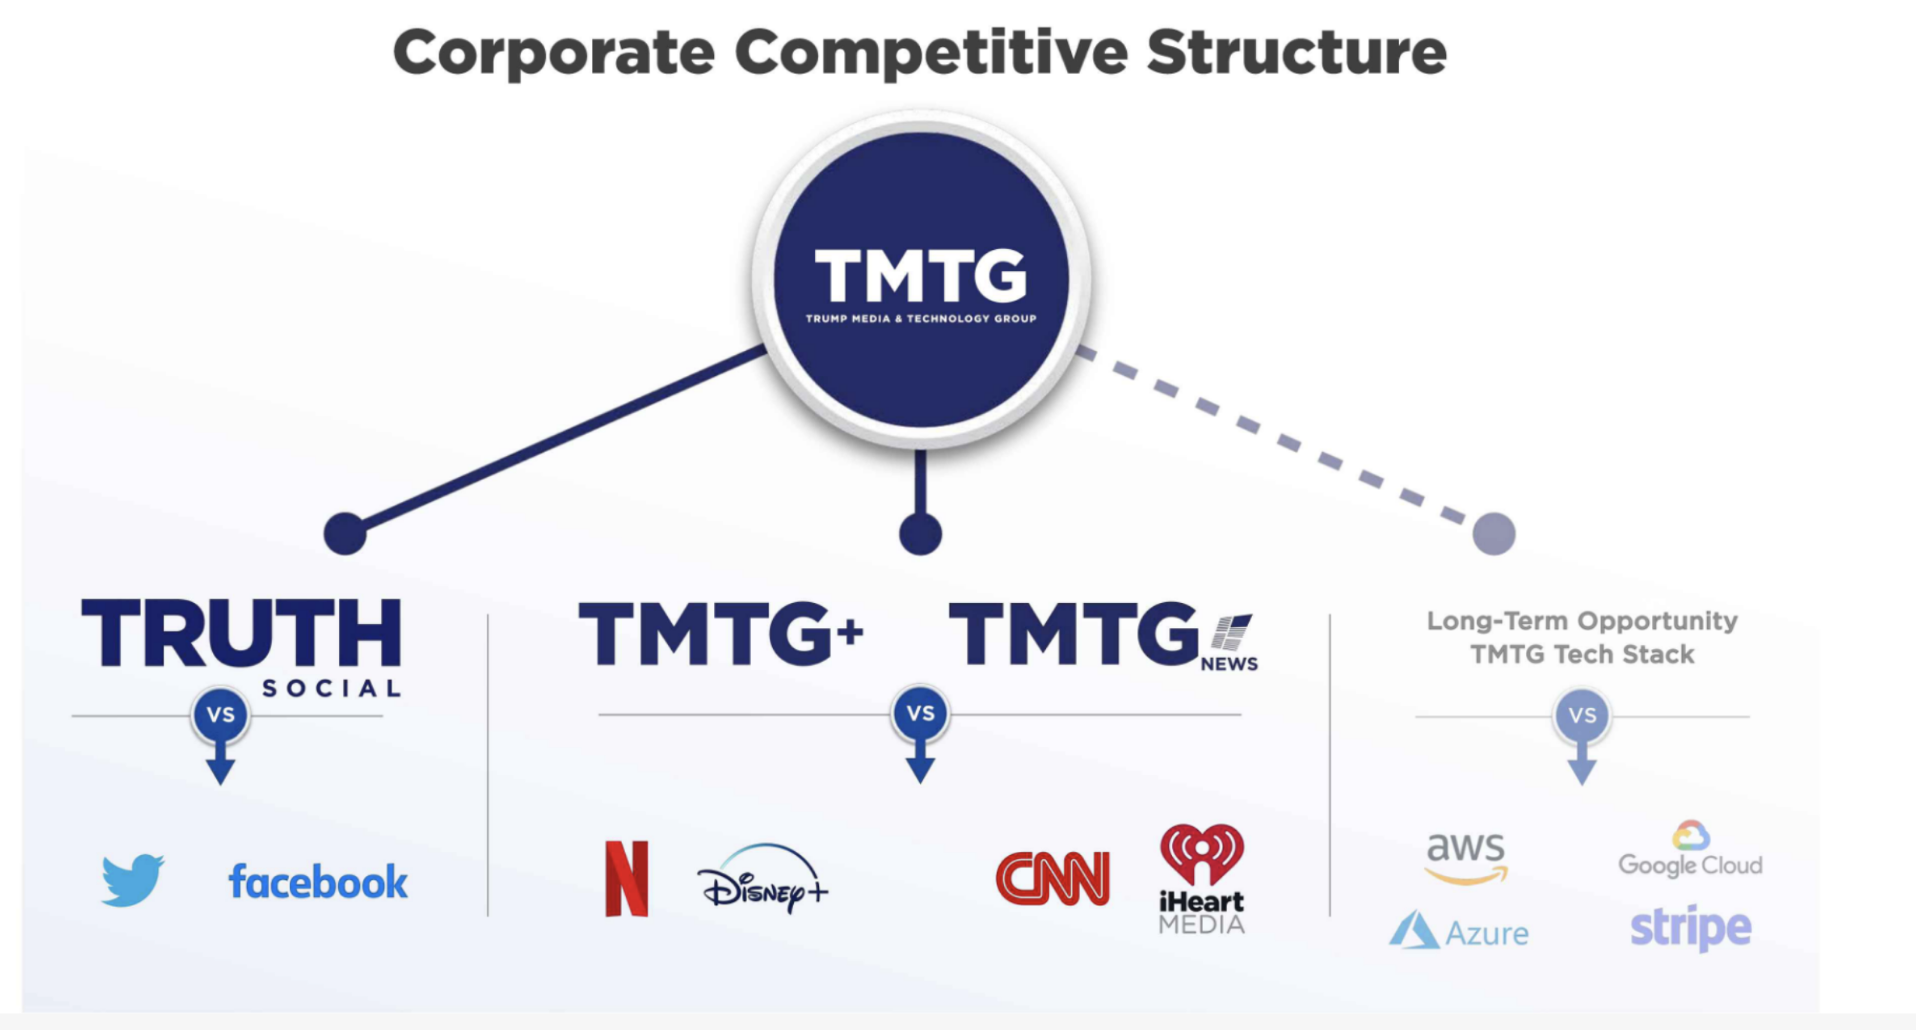  Trump Media and Technology Group